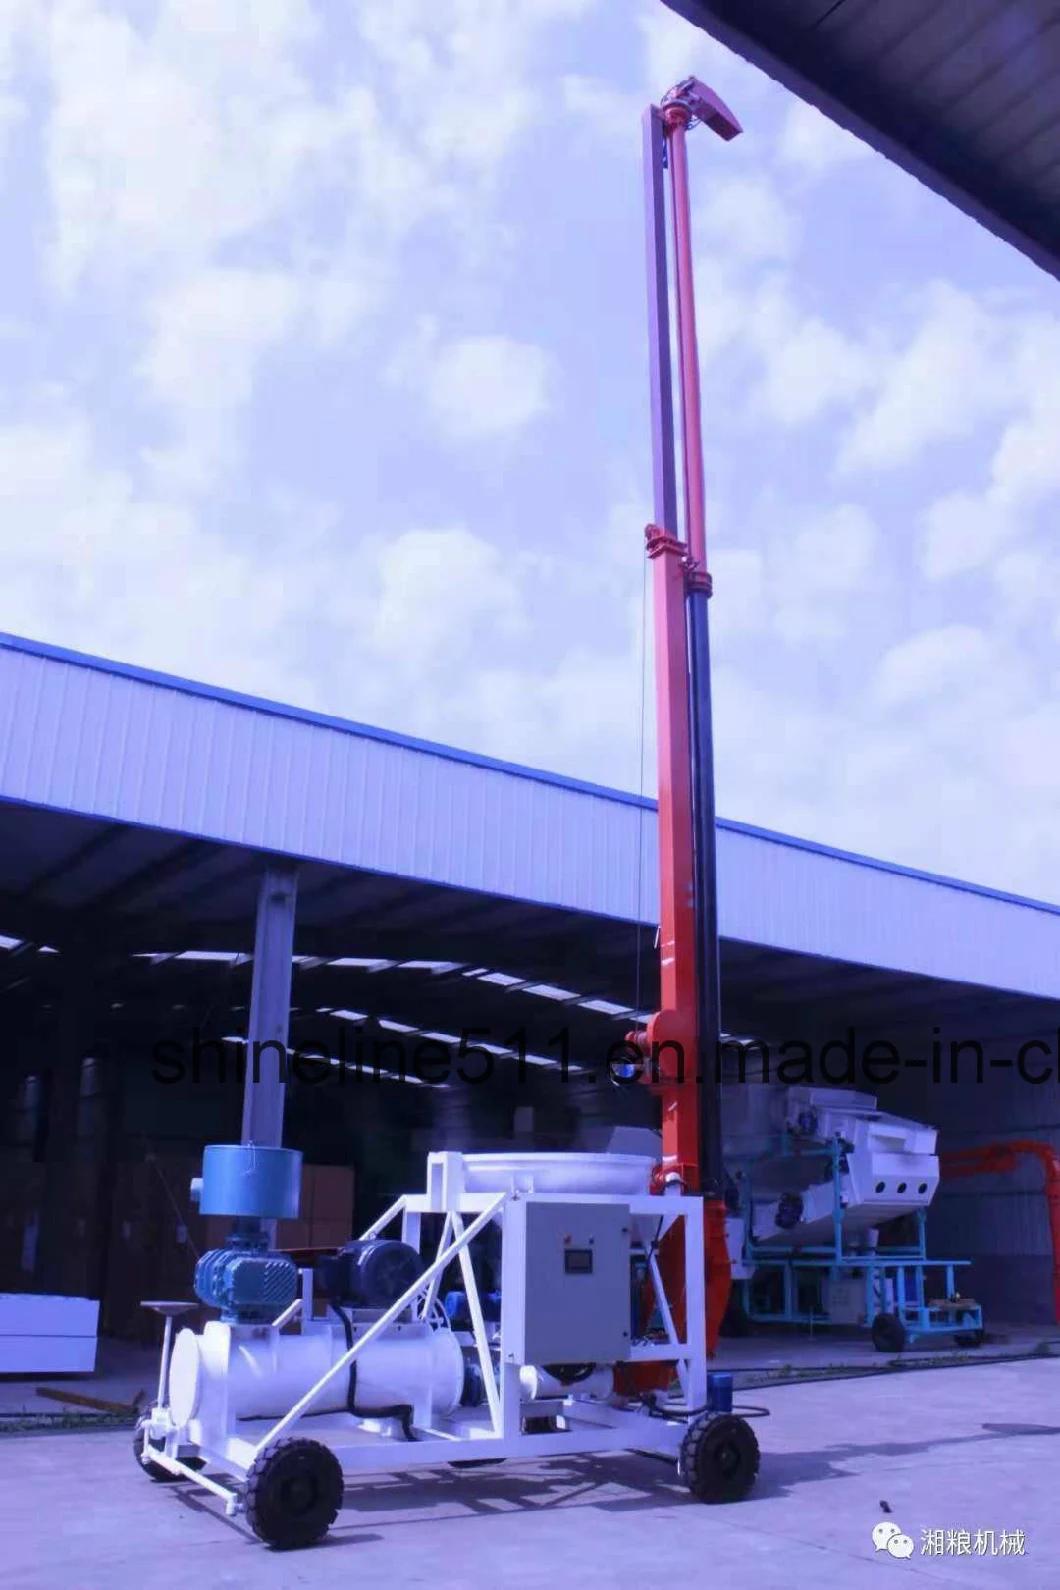 All The Granary Materials Pneumatic Tube System Price Grain Pump